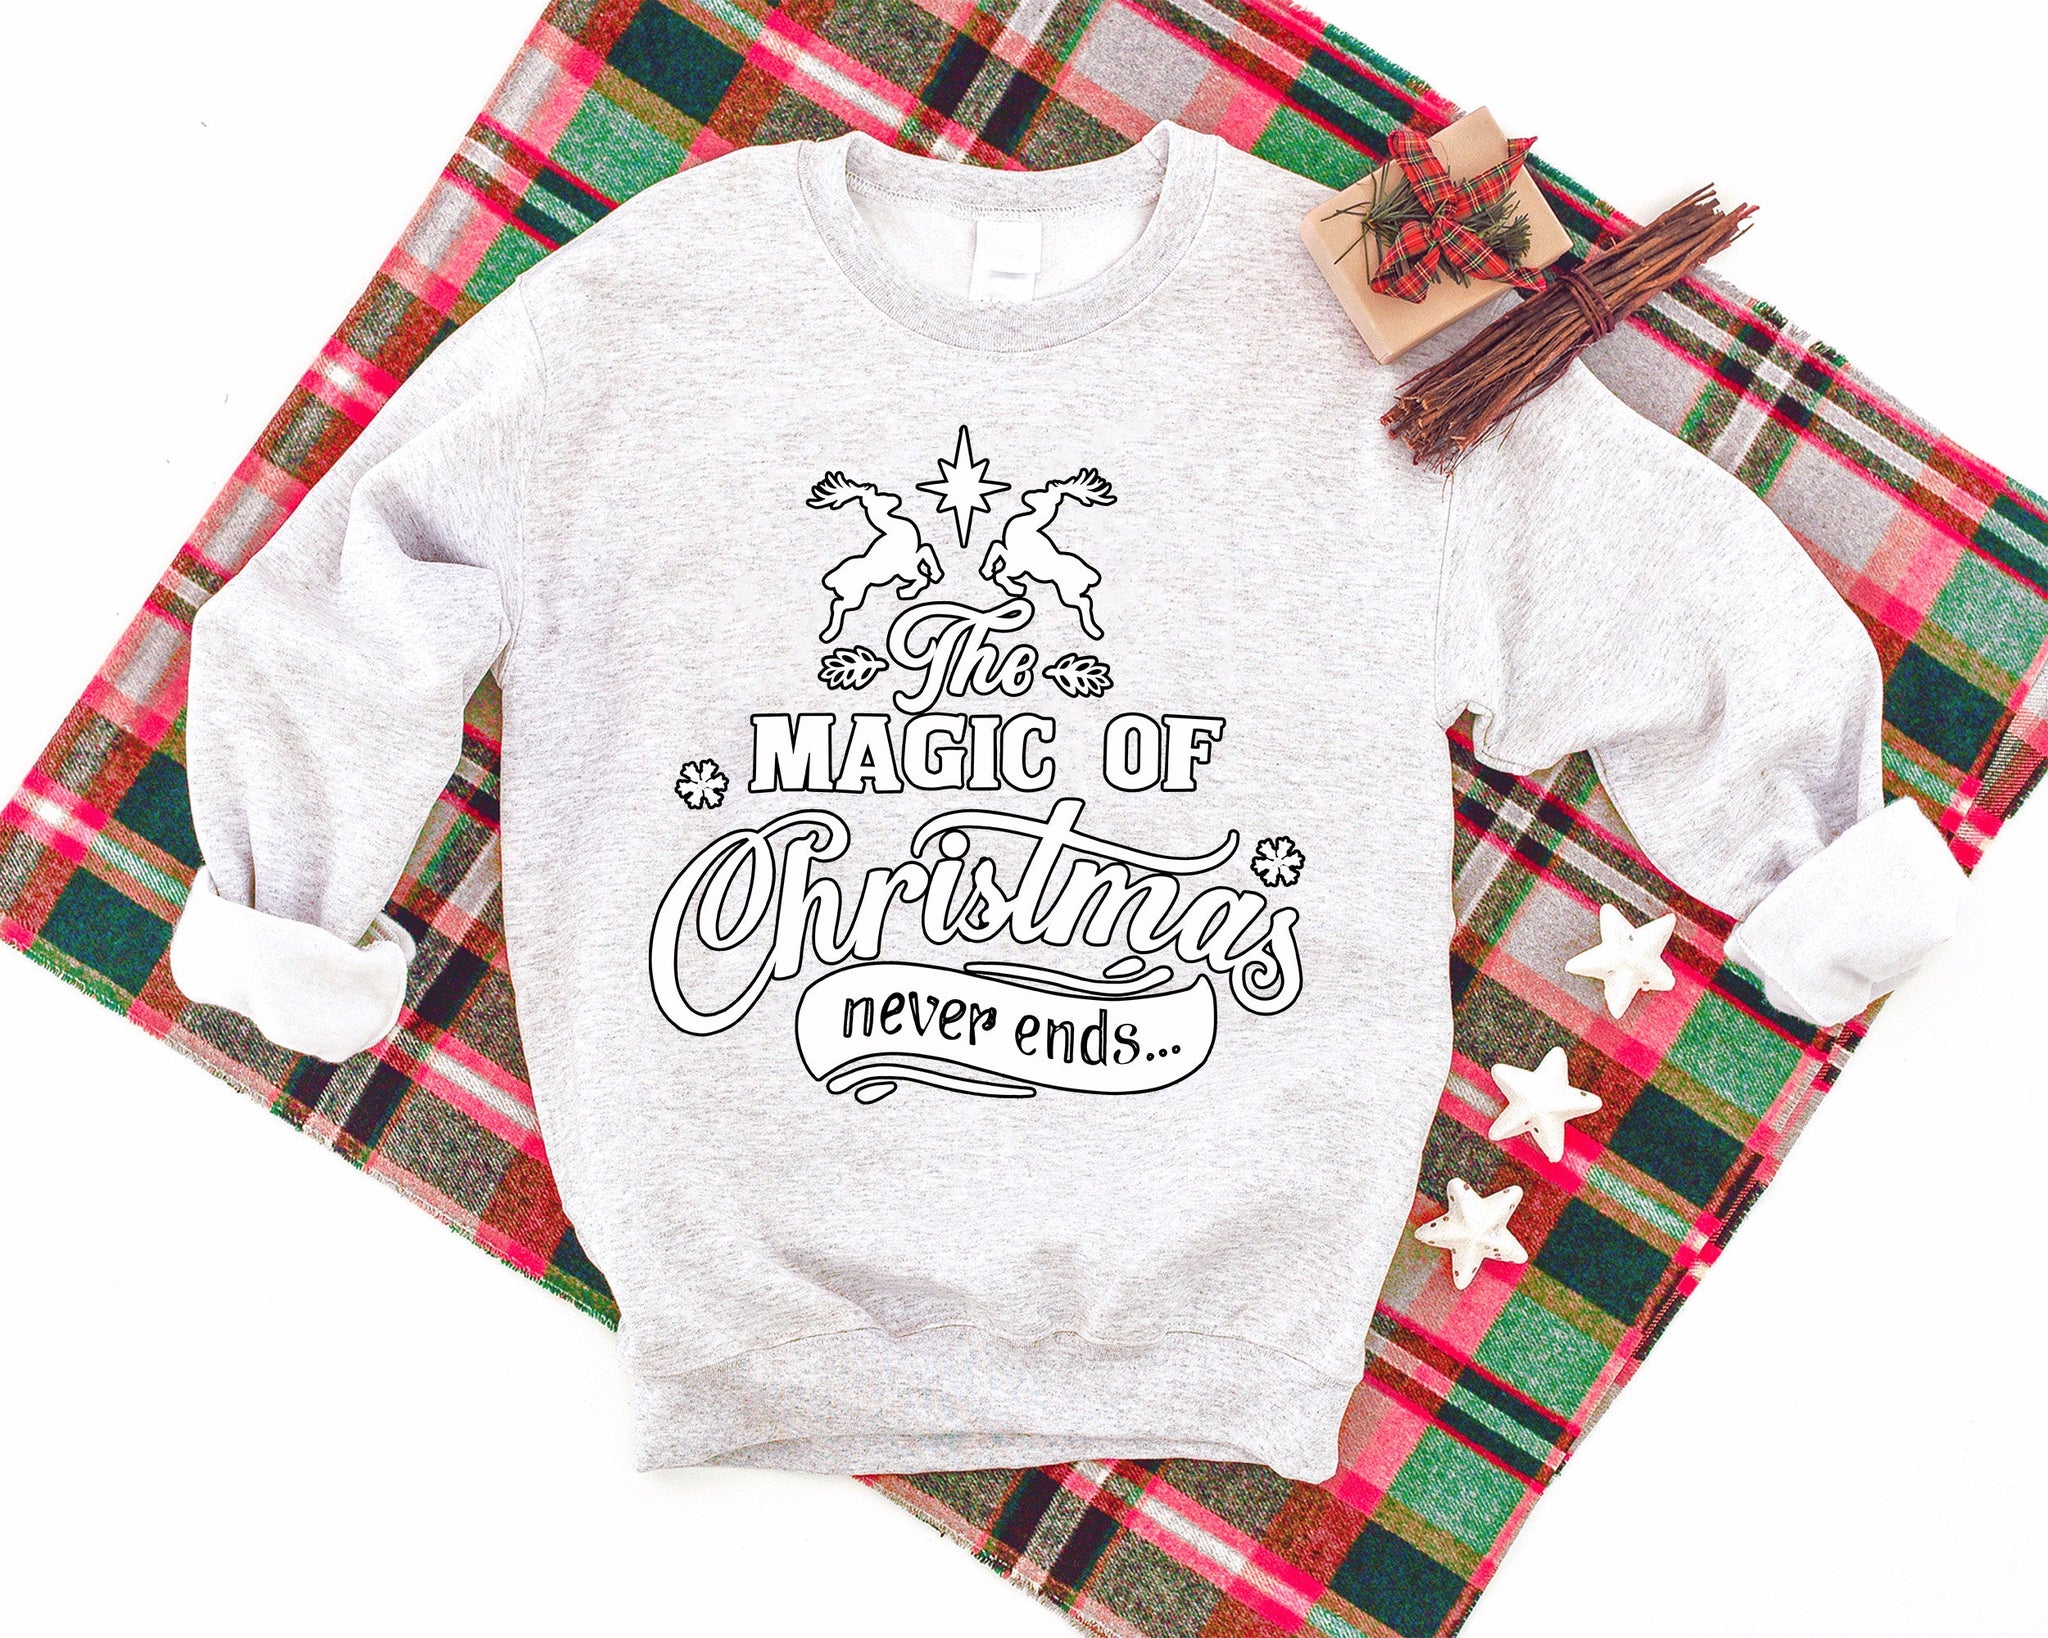 Two Christmas Reindeer Patterned and 'The Magic Of Christmas Never End..' Letter Print Patterned Light-gray Color Casual Long Sleeve Sweatshirts  Family Matching Pajamas Tops With Dog Bandana